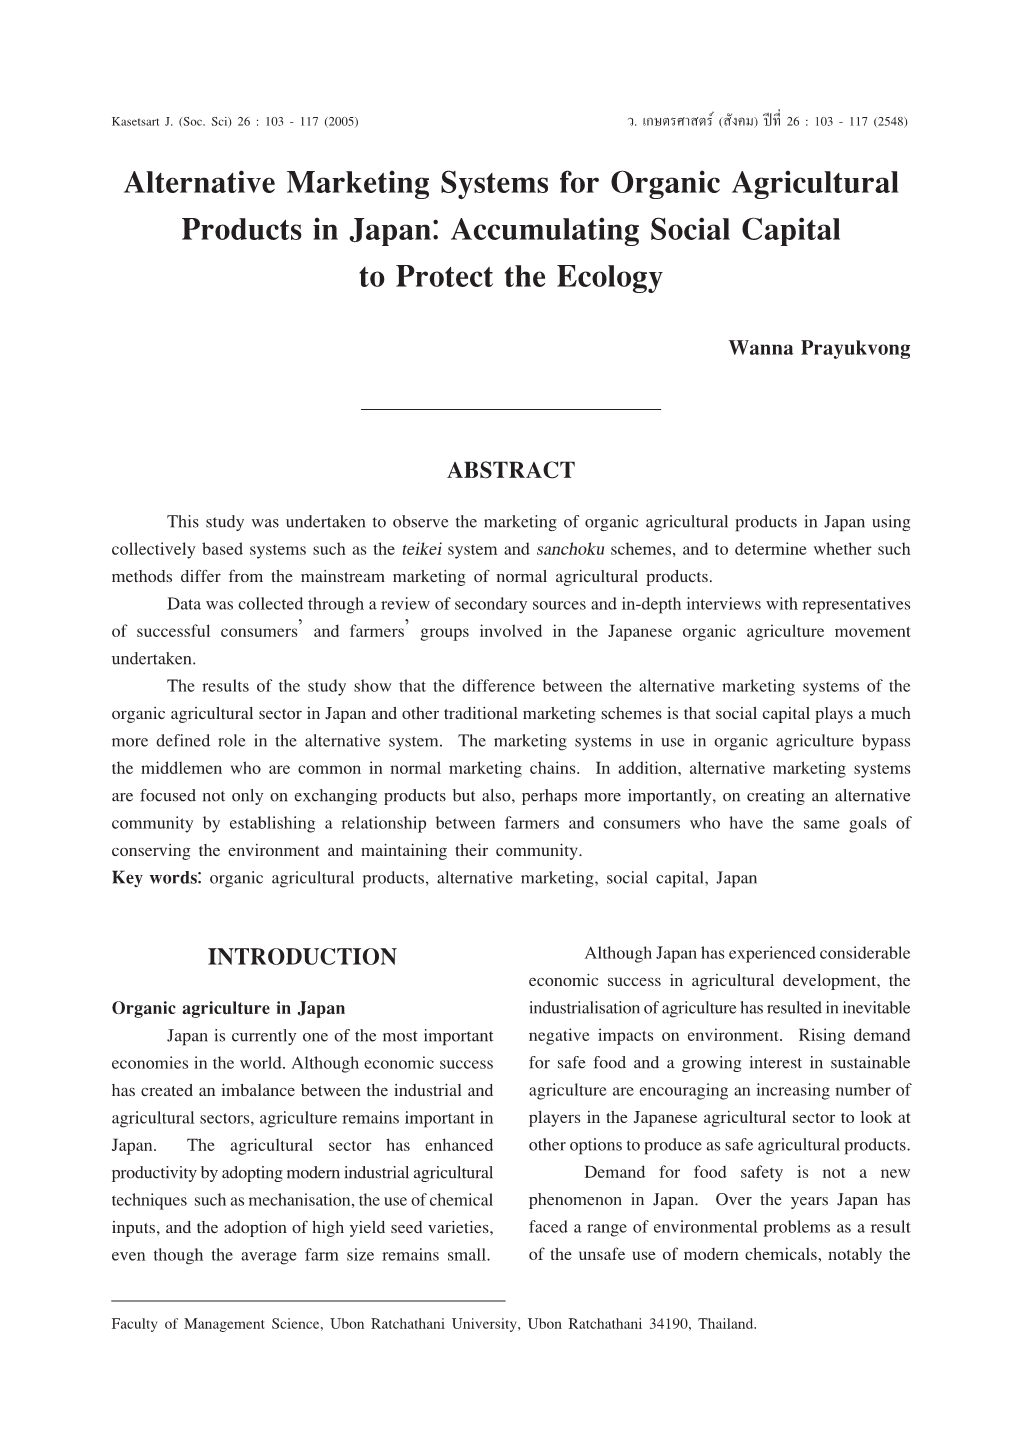 Alternative Marketing Systems for Organic Agricultural Products in Japan: Accumulating Social Capital to Protect the Ecology